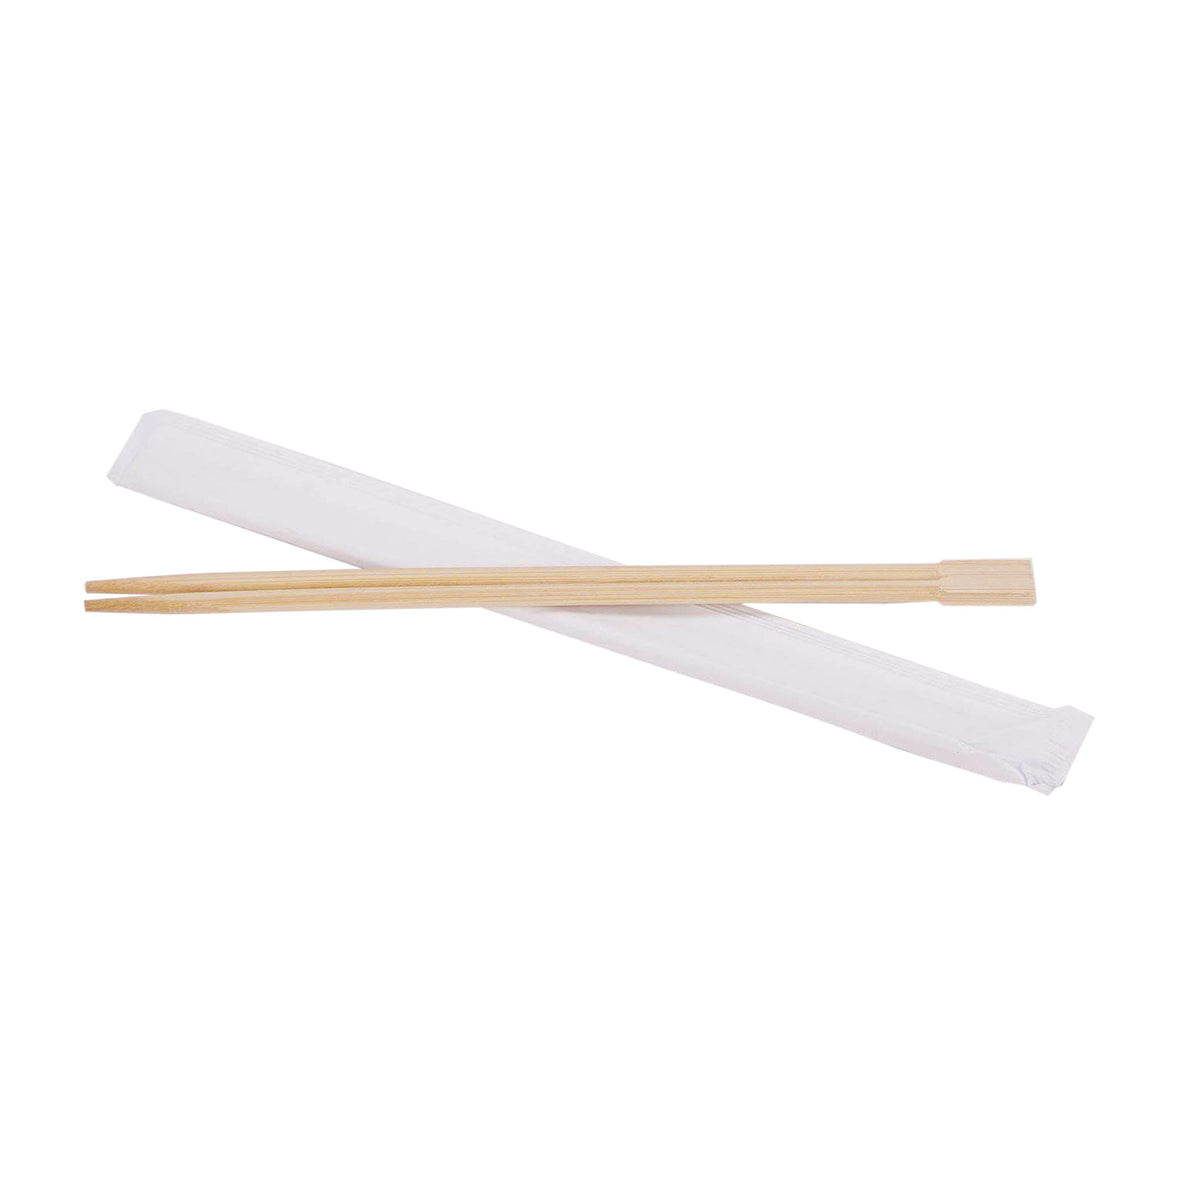 23 cm BAMBOO CHOPSTICKS WRAPPED 2000 Pieces - Hotpack Global